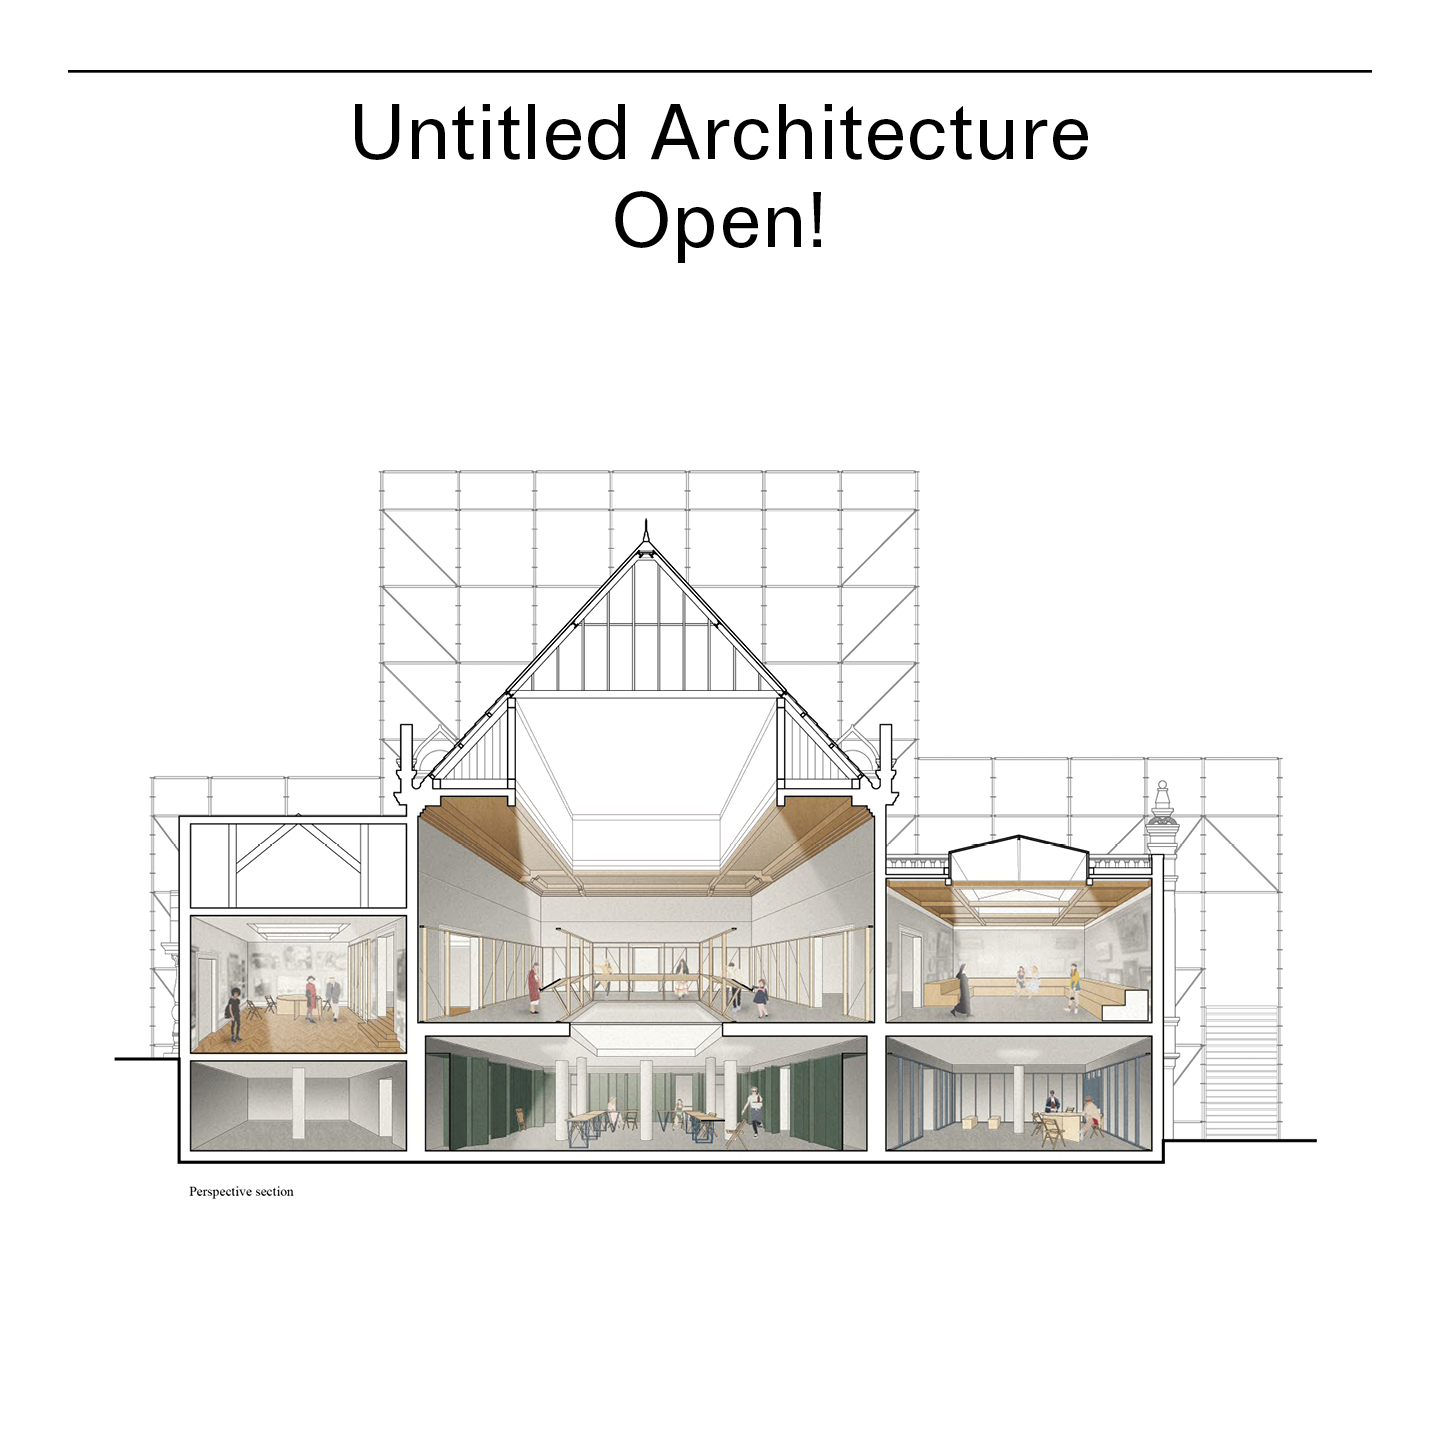 Untitled Architecture Open